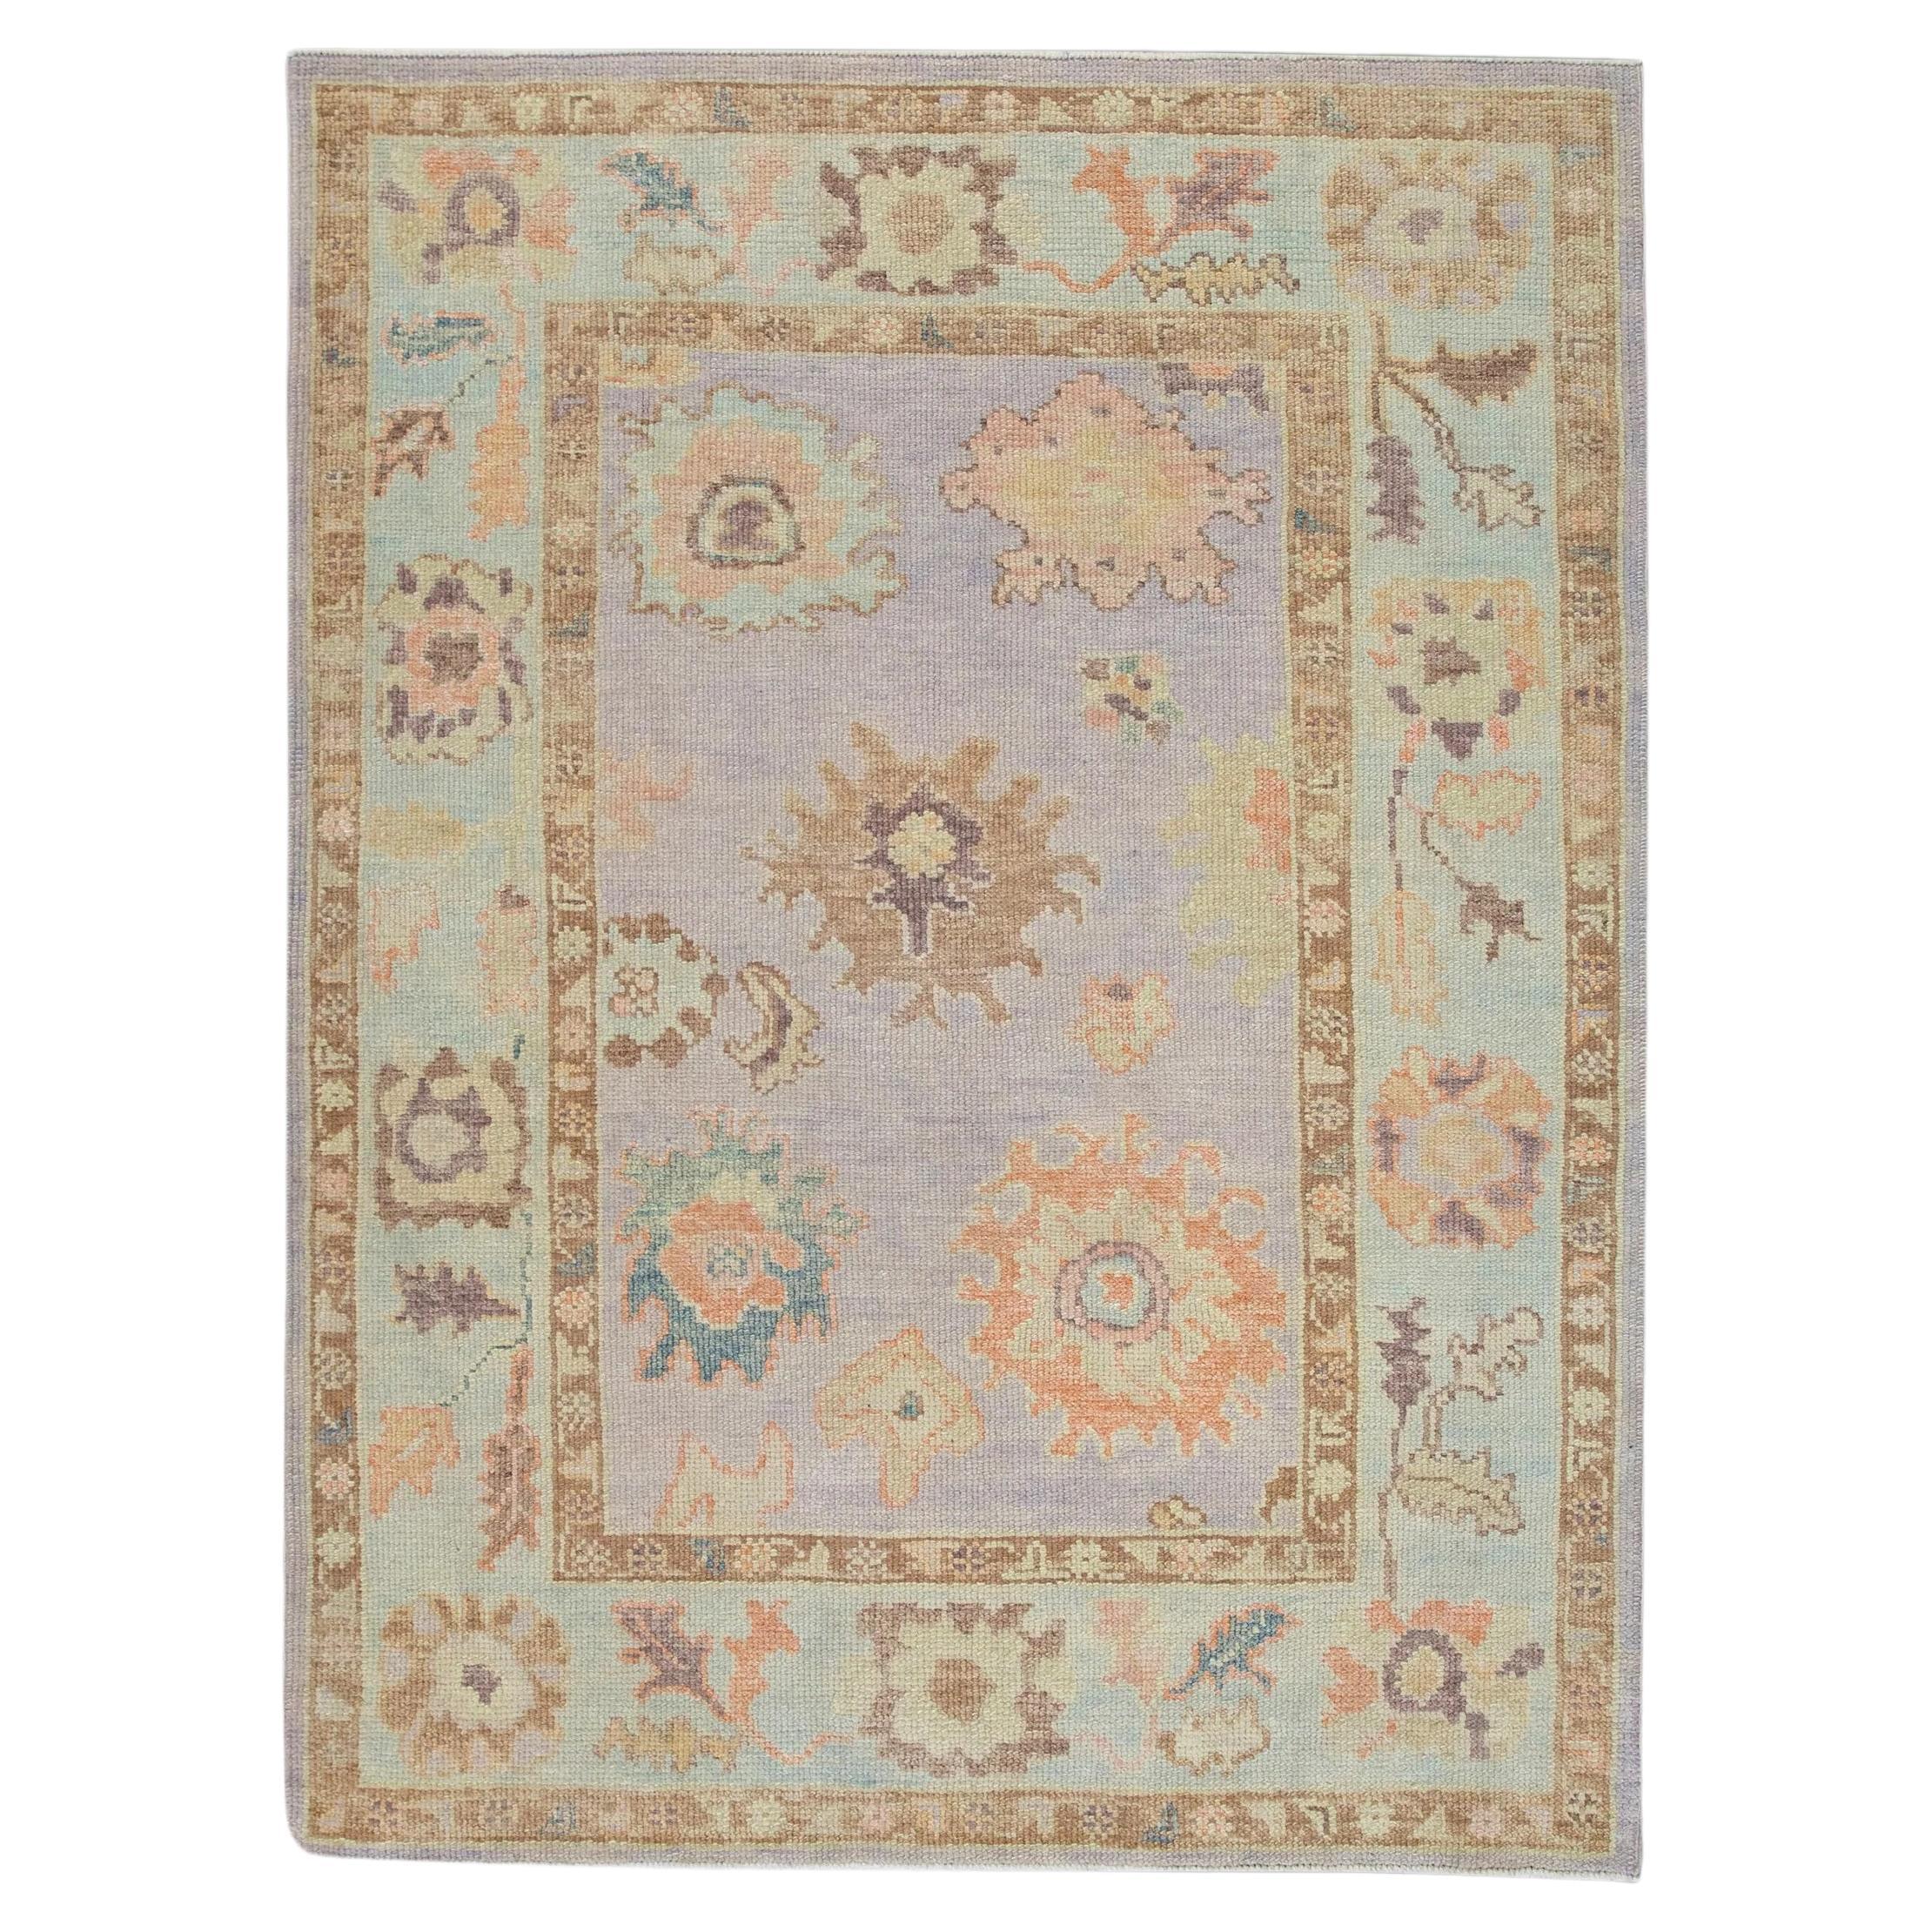 Pastel Purple Colorful Floral Design Handwoven Wool Turkish Oushak Rug 4'1"x5'6" For Sale